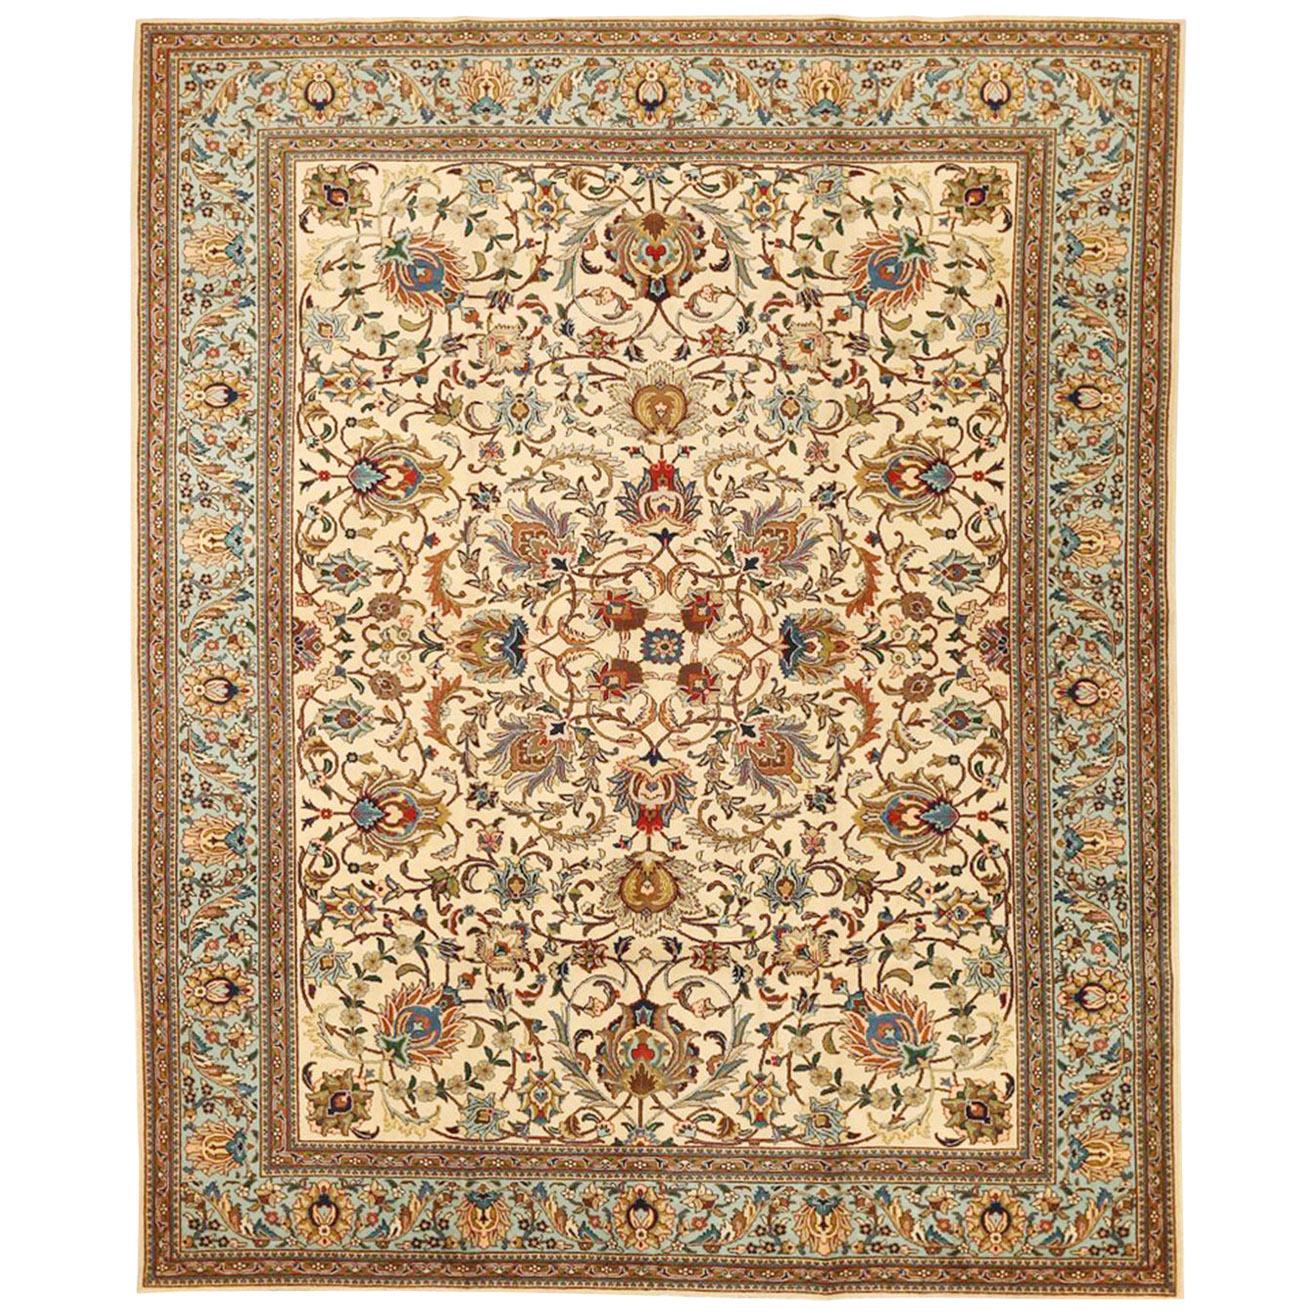 Antique Persian Tabriz Rug with Colorful Flower Motifs on Ivory Field